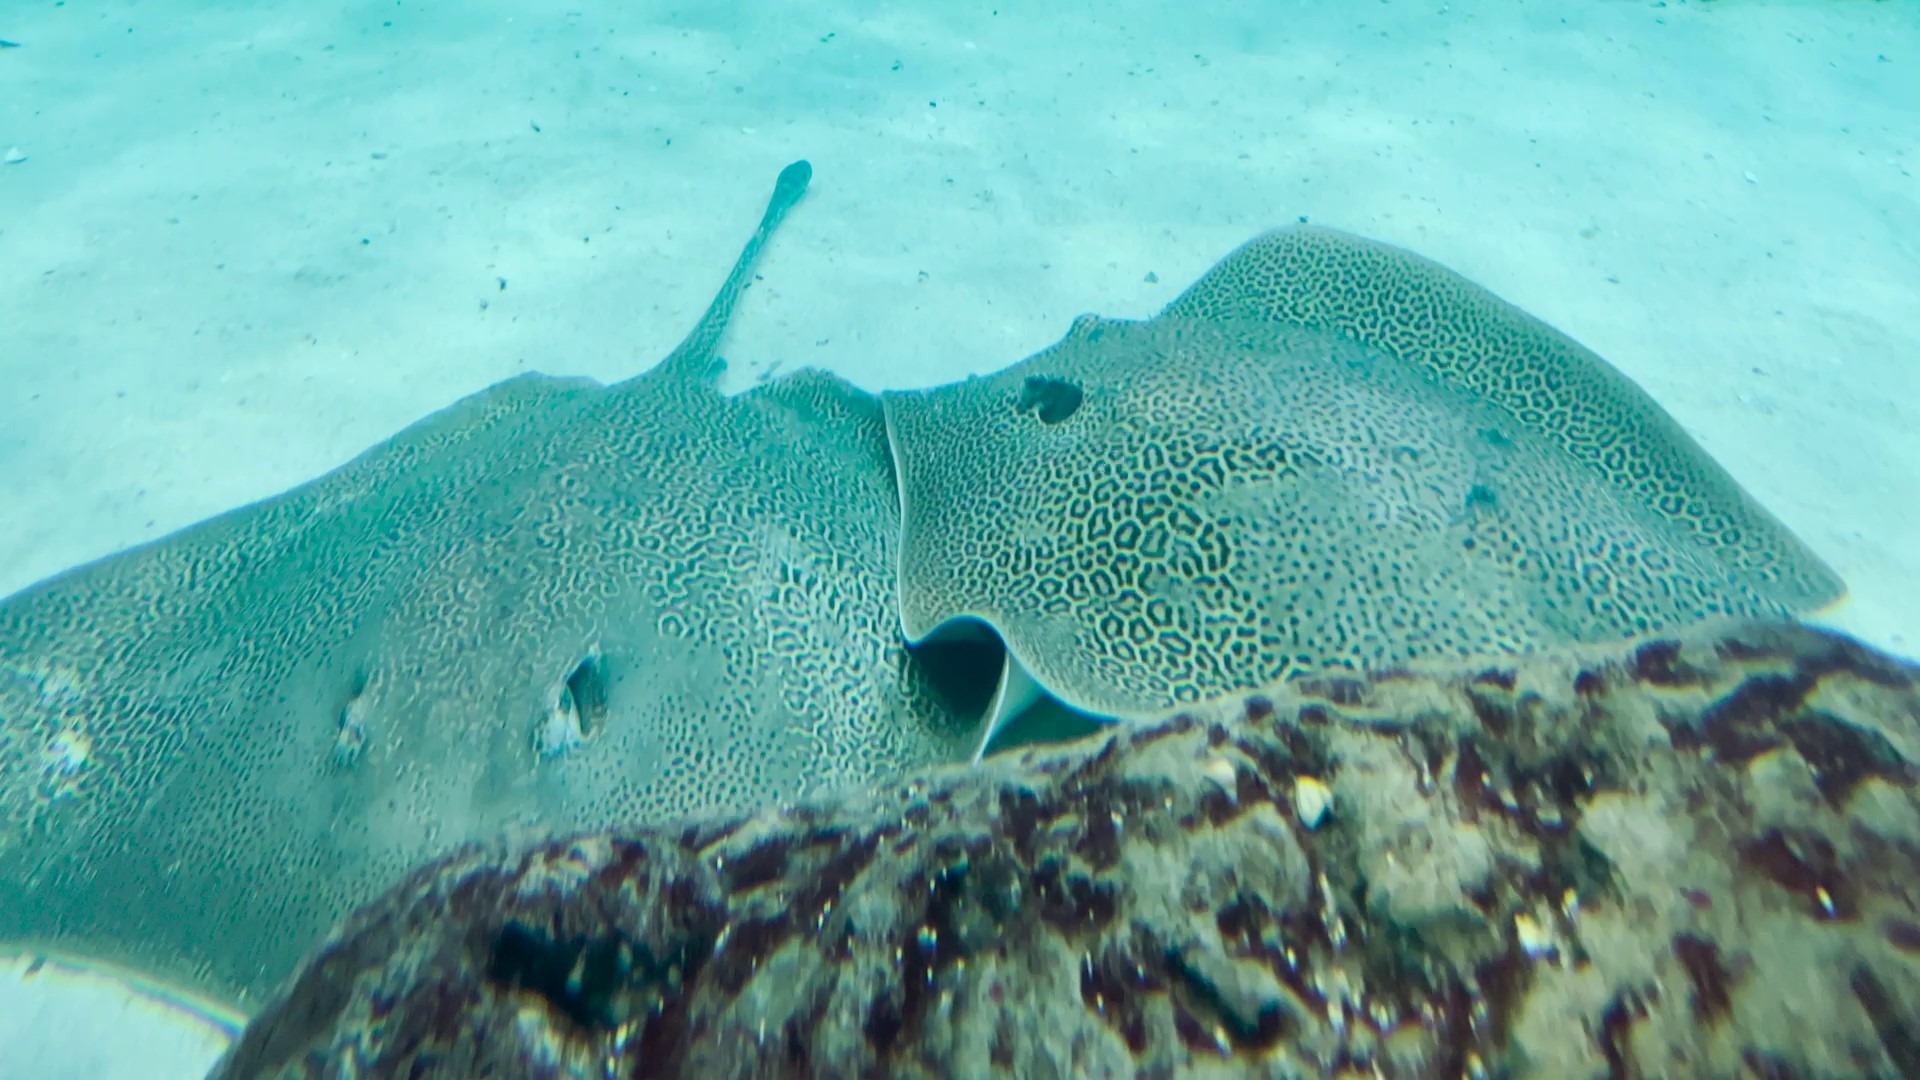 The Aquarium says this is the first time it has housed this species of stingray.